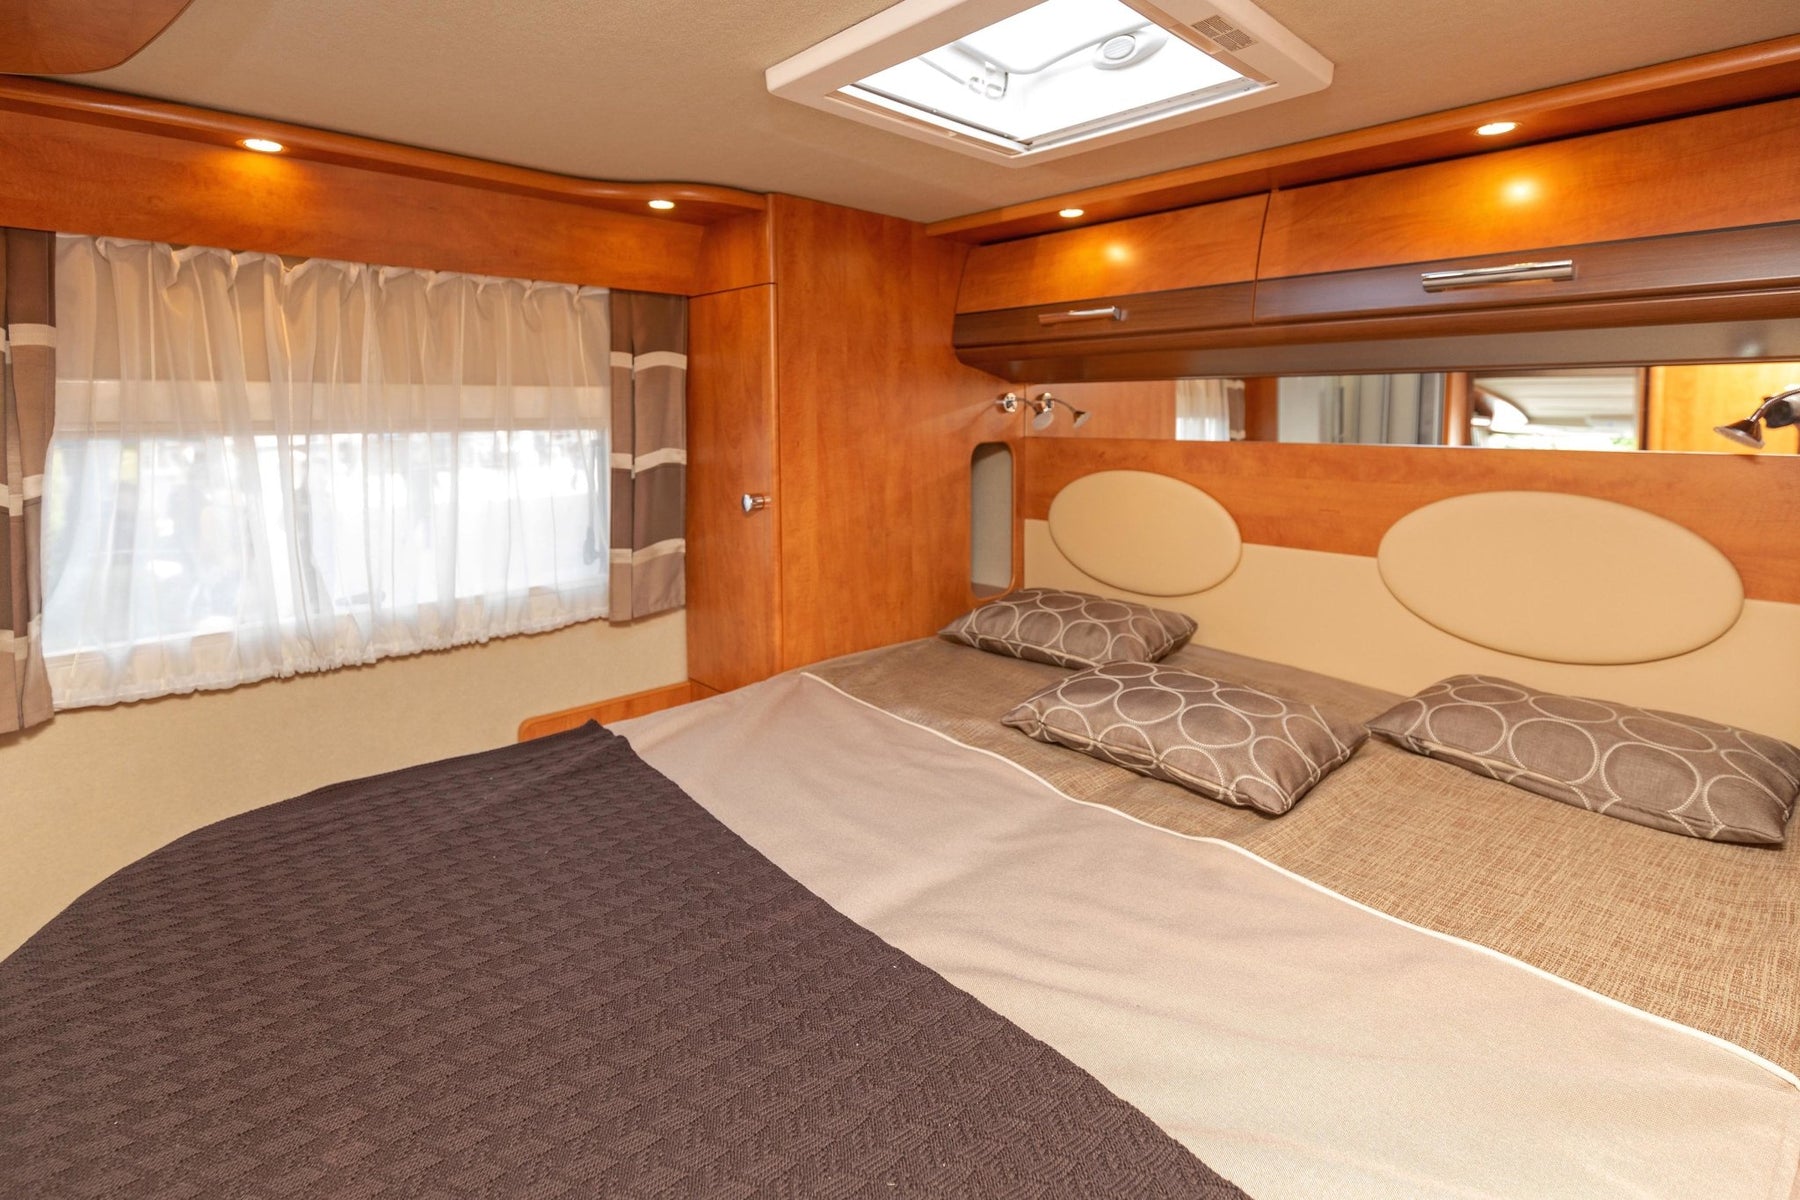 How to Make a Memory Foam Mattress Comfortable in Your RV